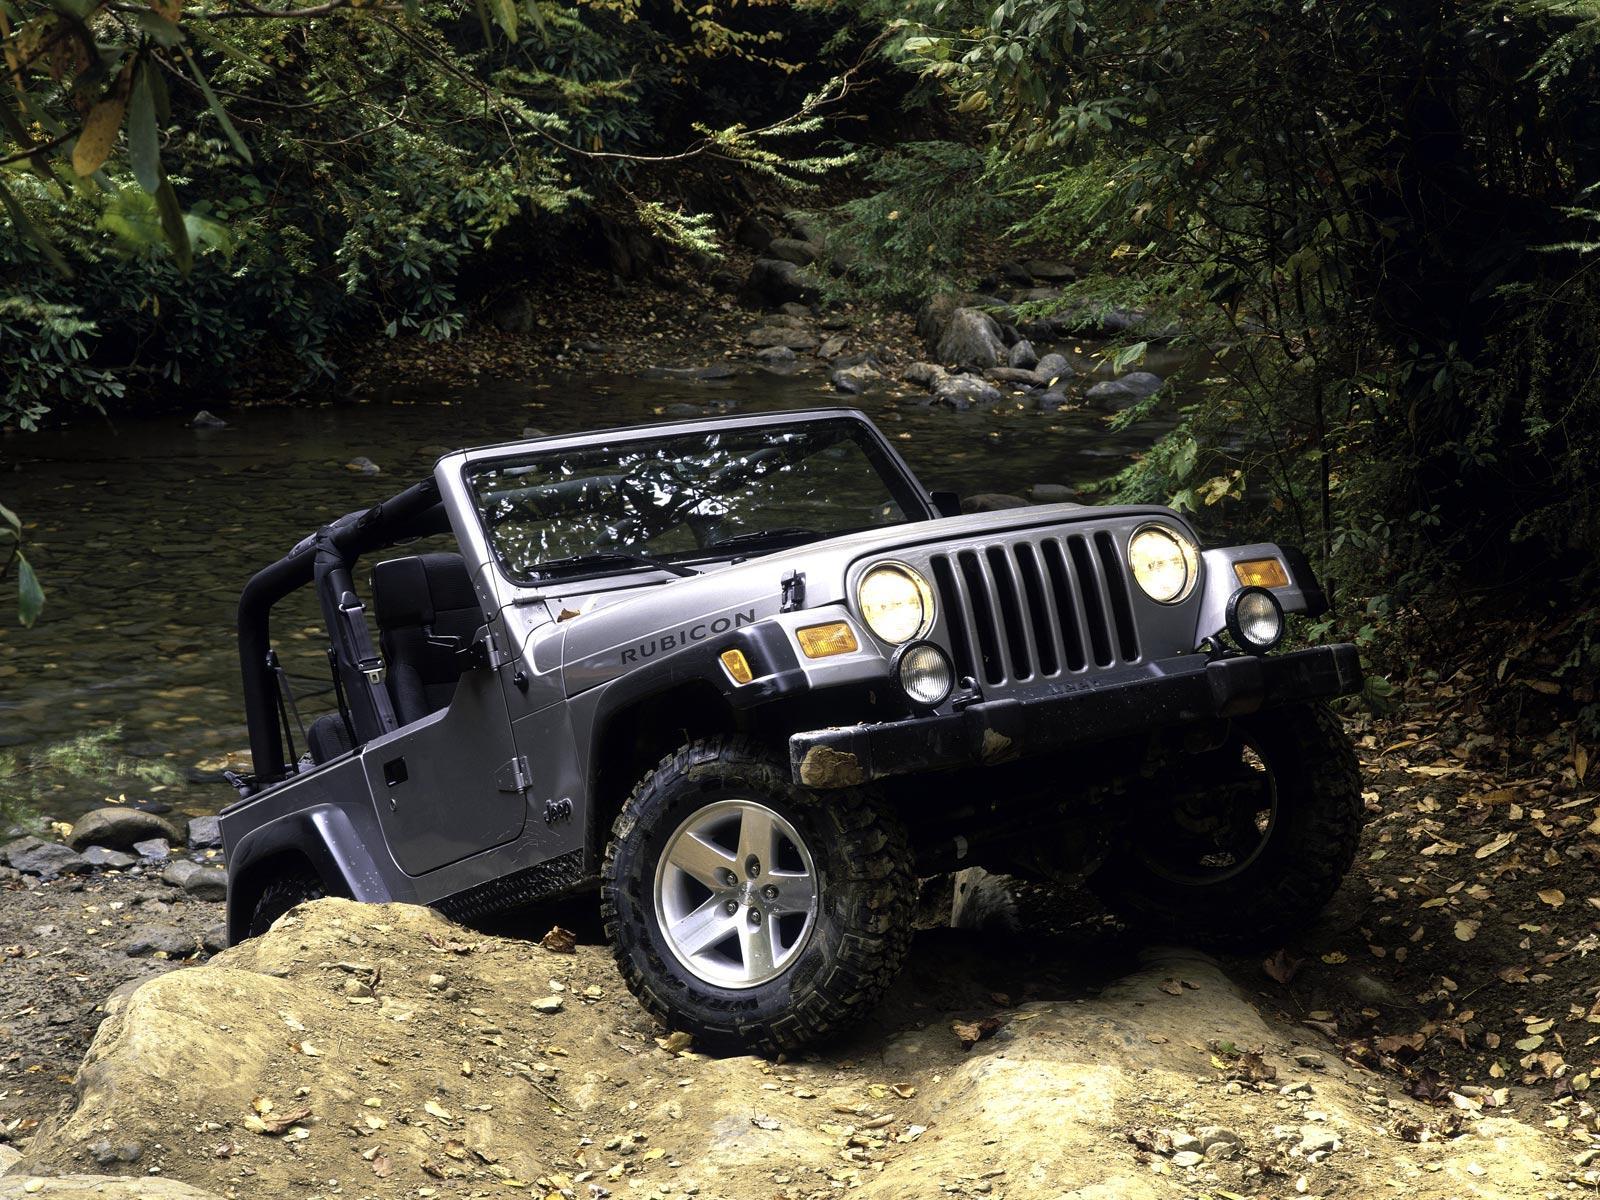 Jeep Wallpapers Wallpaper Cave